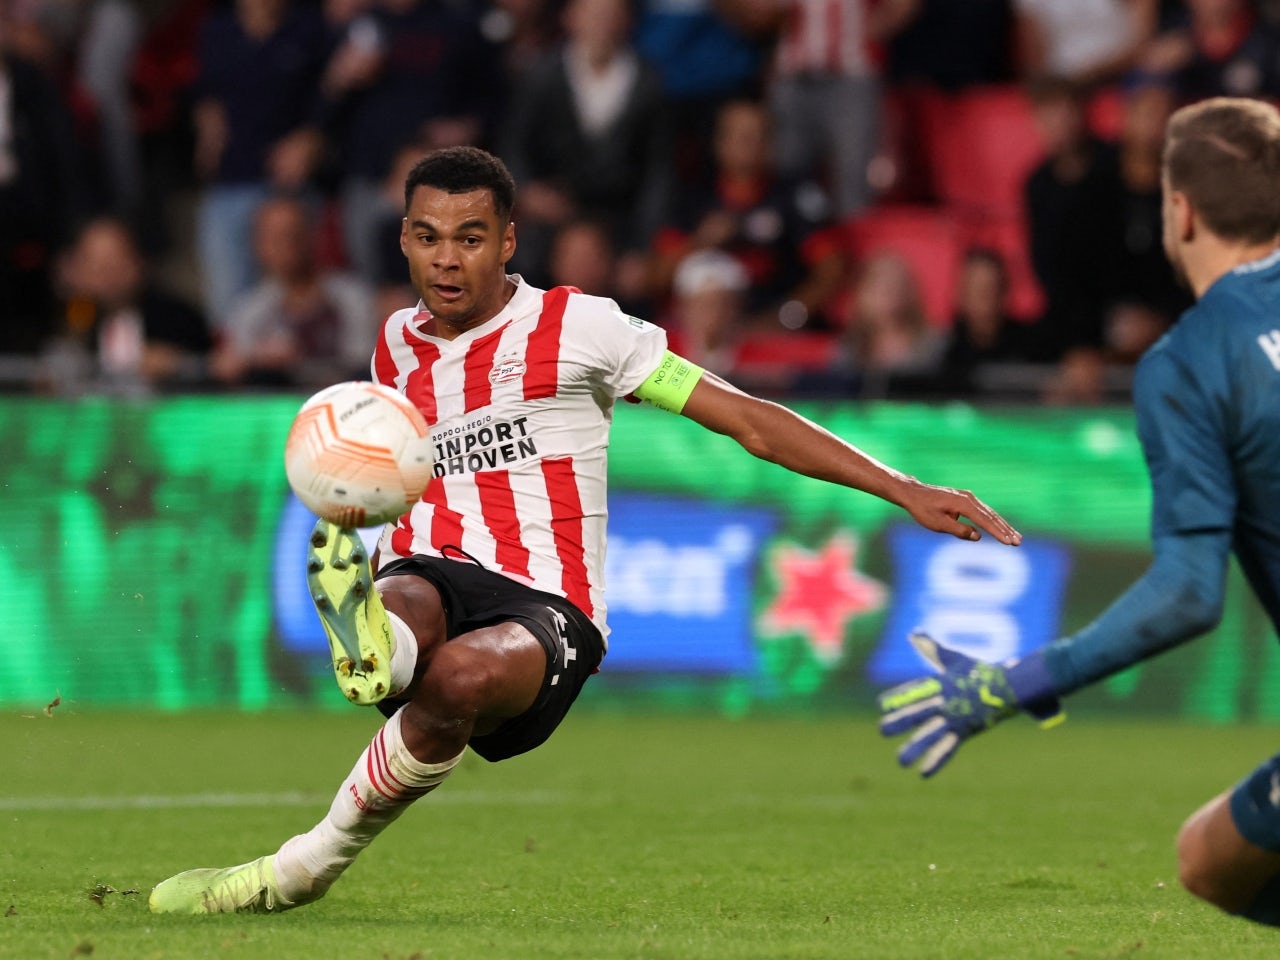 PSV Eindhoven's Cody Gakpo 'to change agents amid Premier League links'